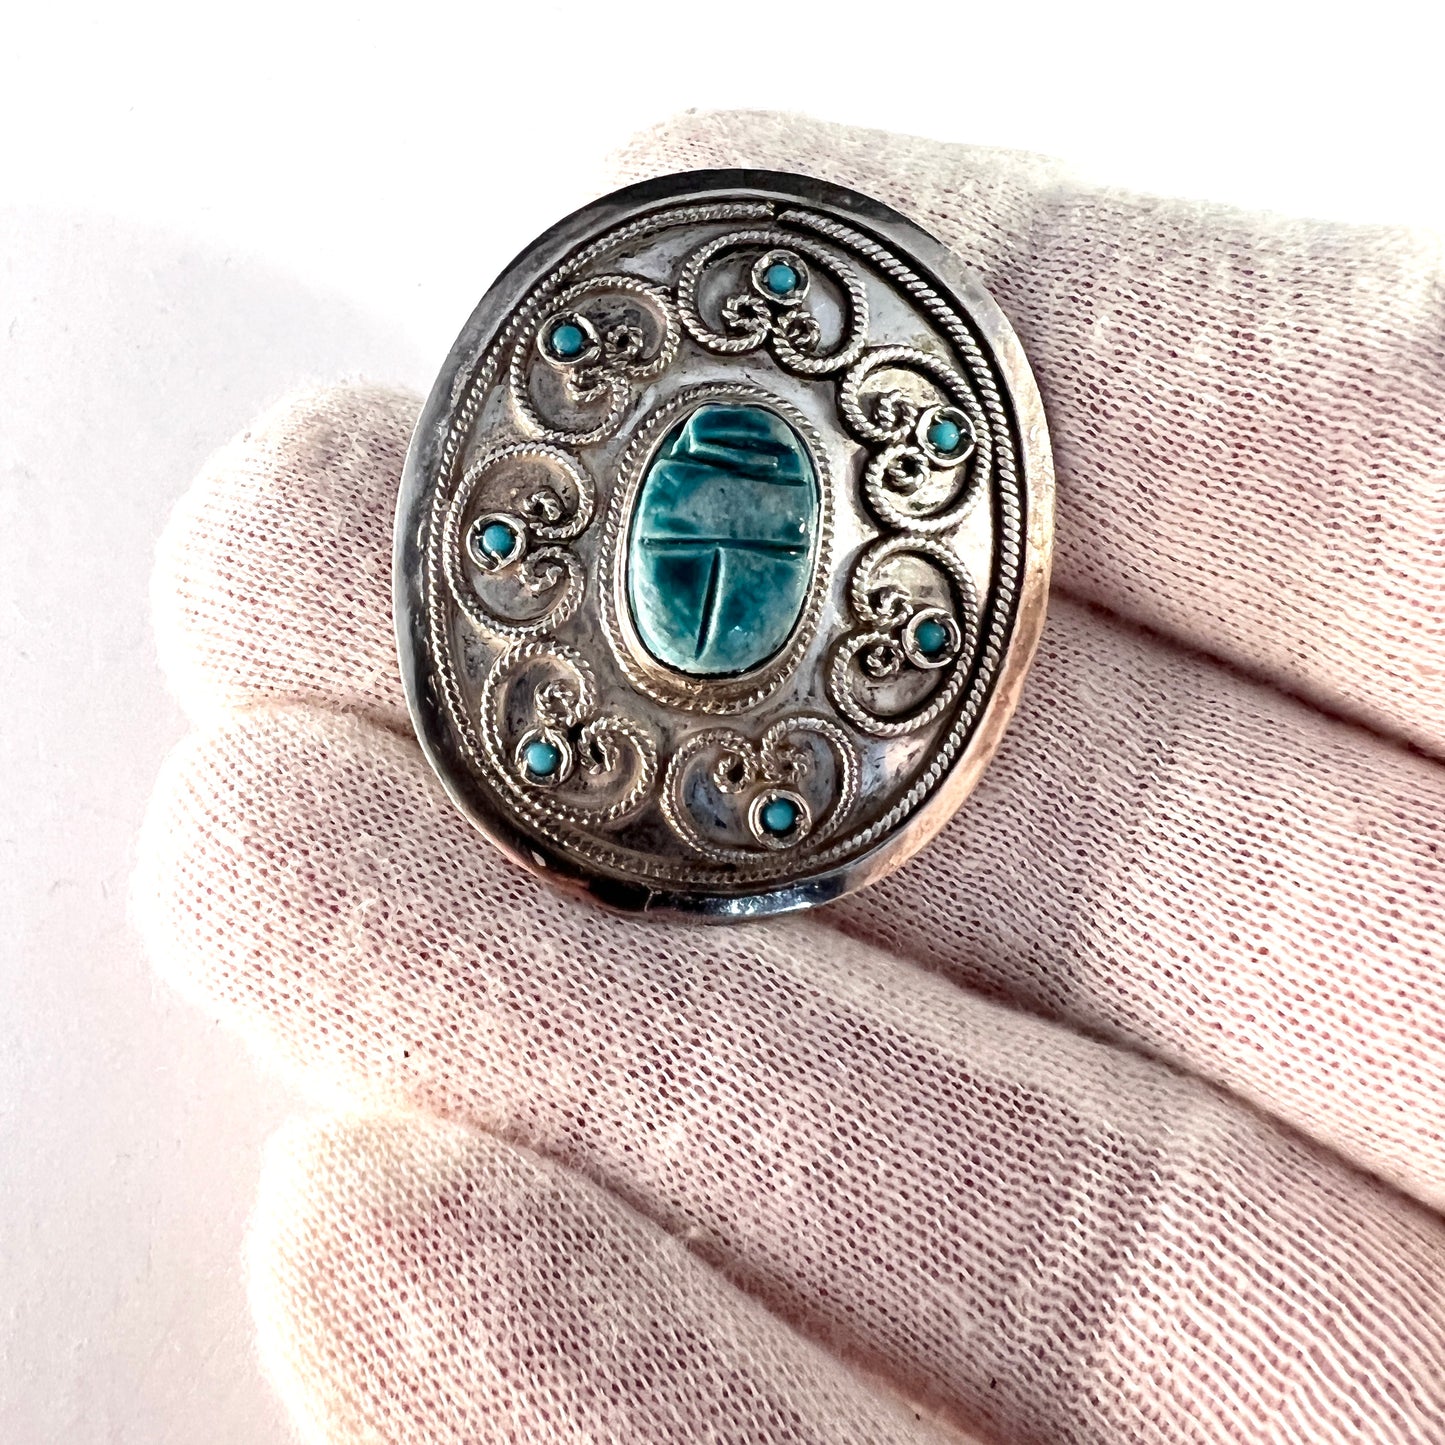 Egypt, Vintage 900 Silver Faience Scarab Turquoise Brooch Pendant.